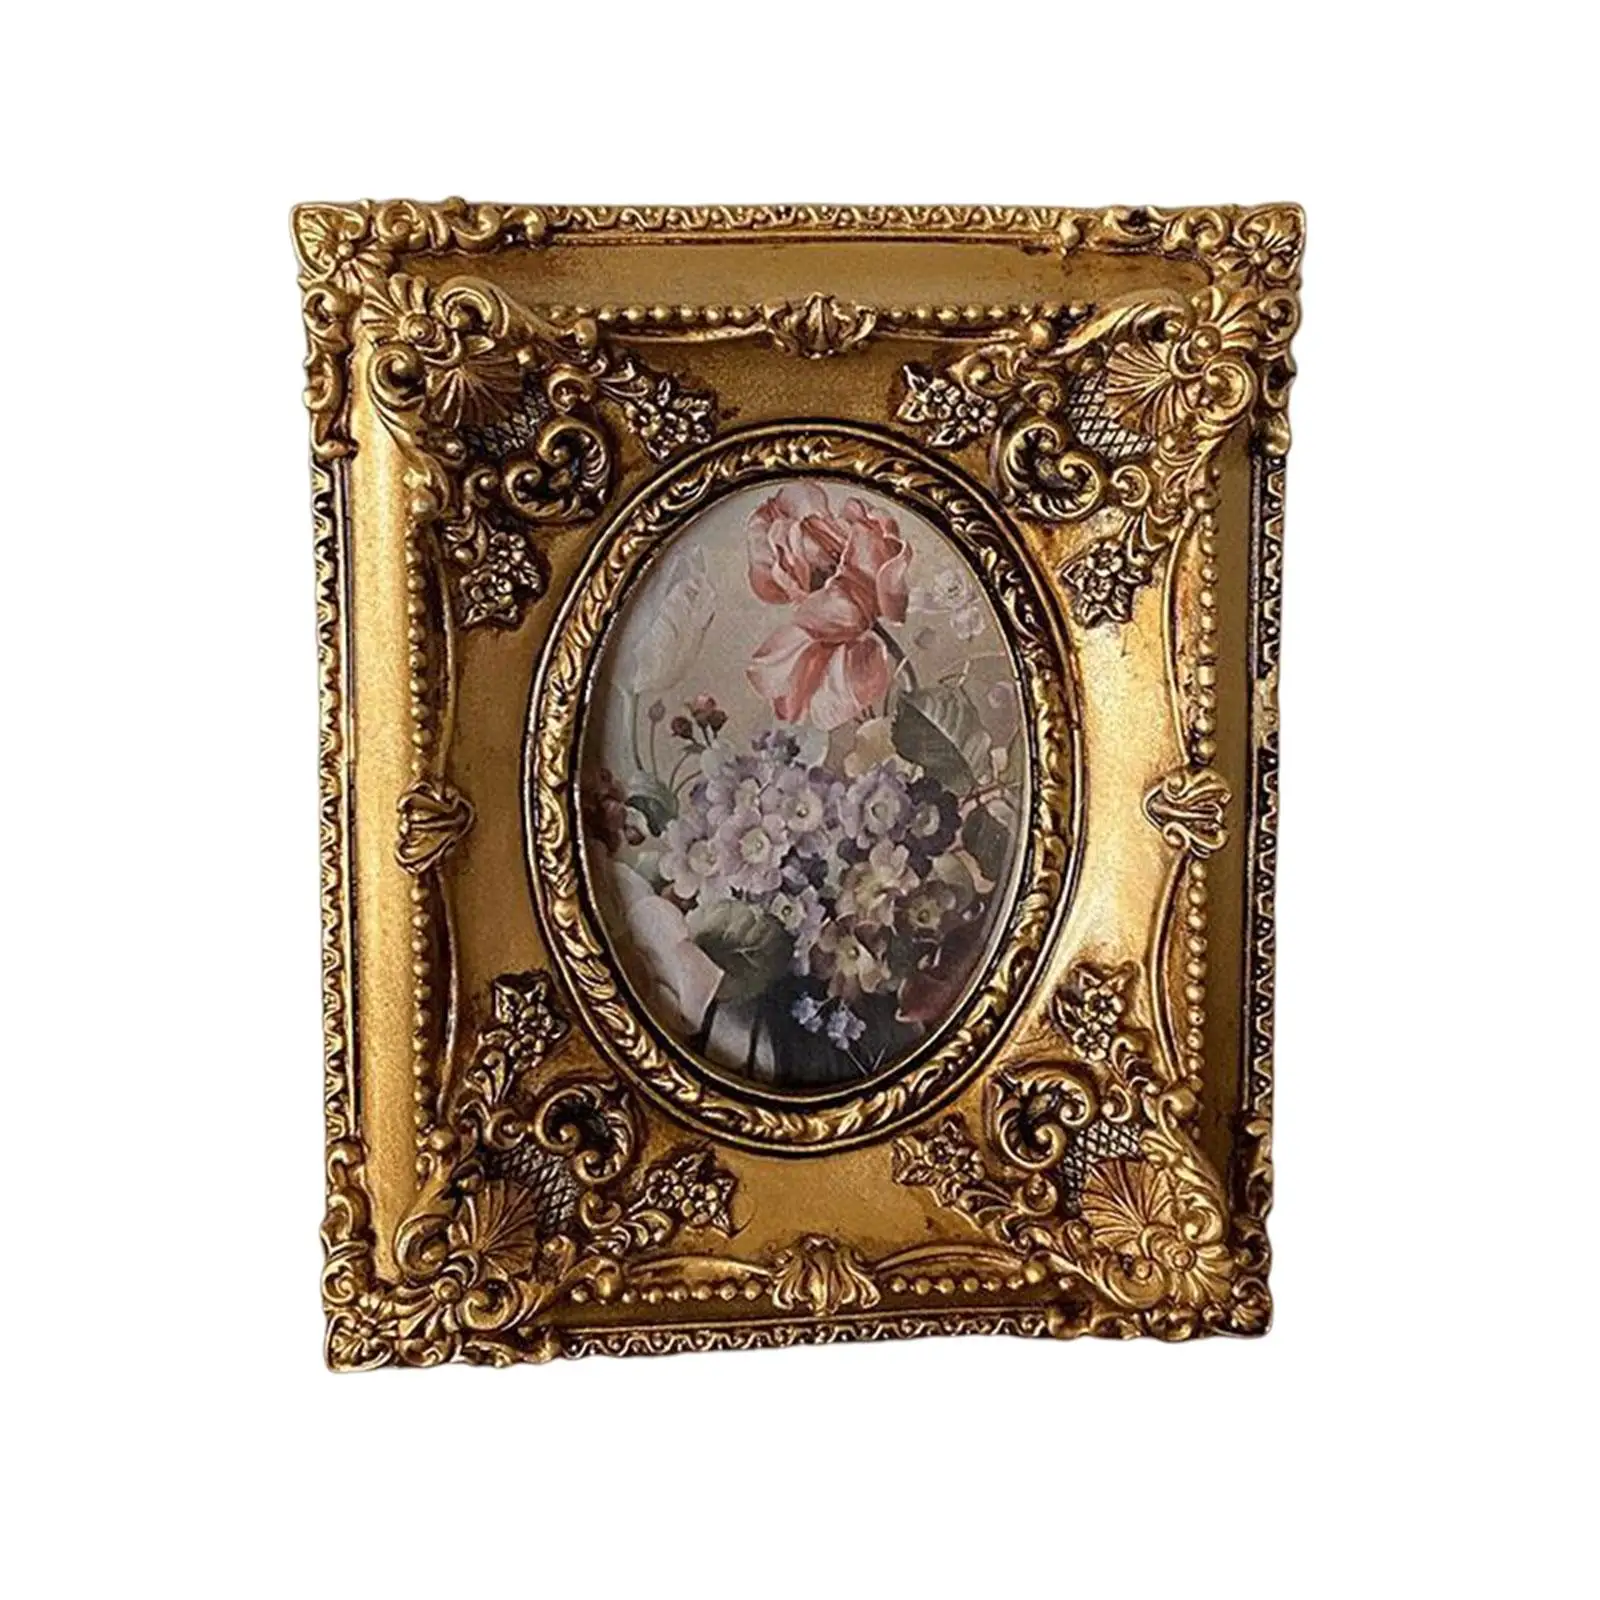 Vintage Style Photo Frame Tabletop Wall Hanging Ornate Ornament Resin Picture Frame Display Holder for Office Home Decoration